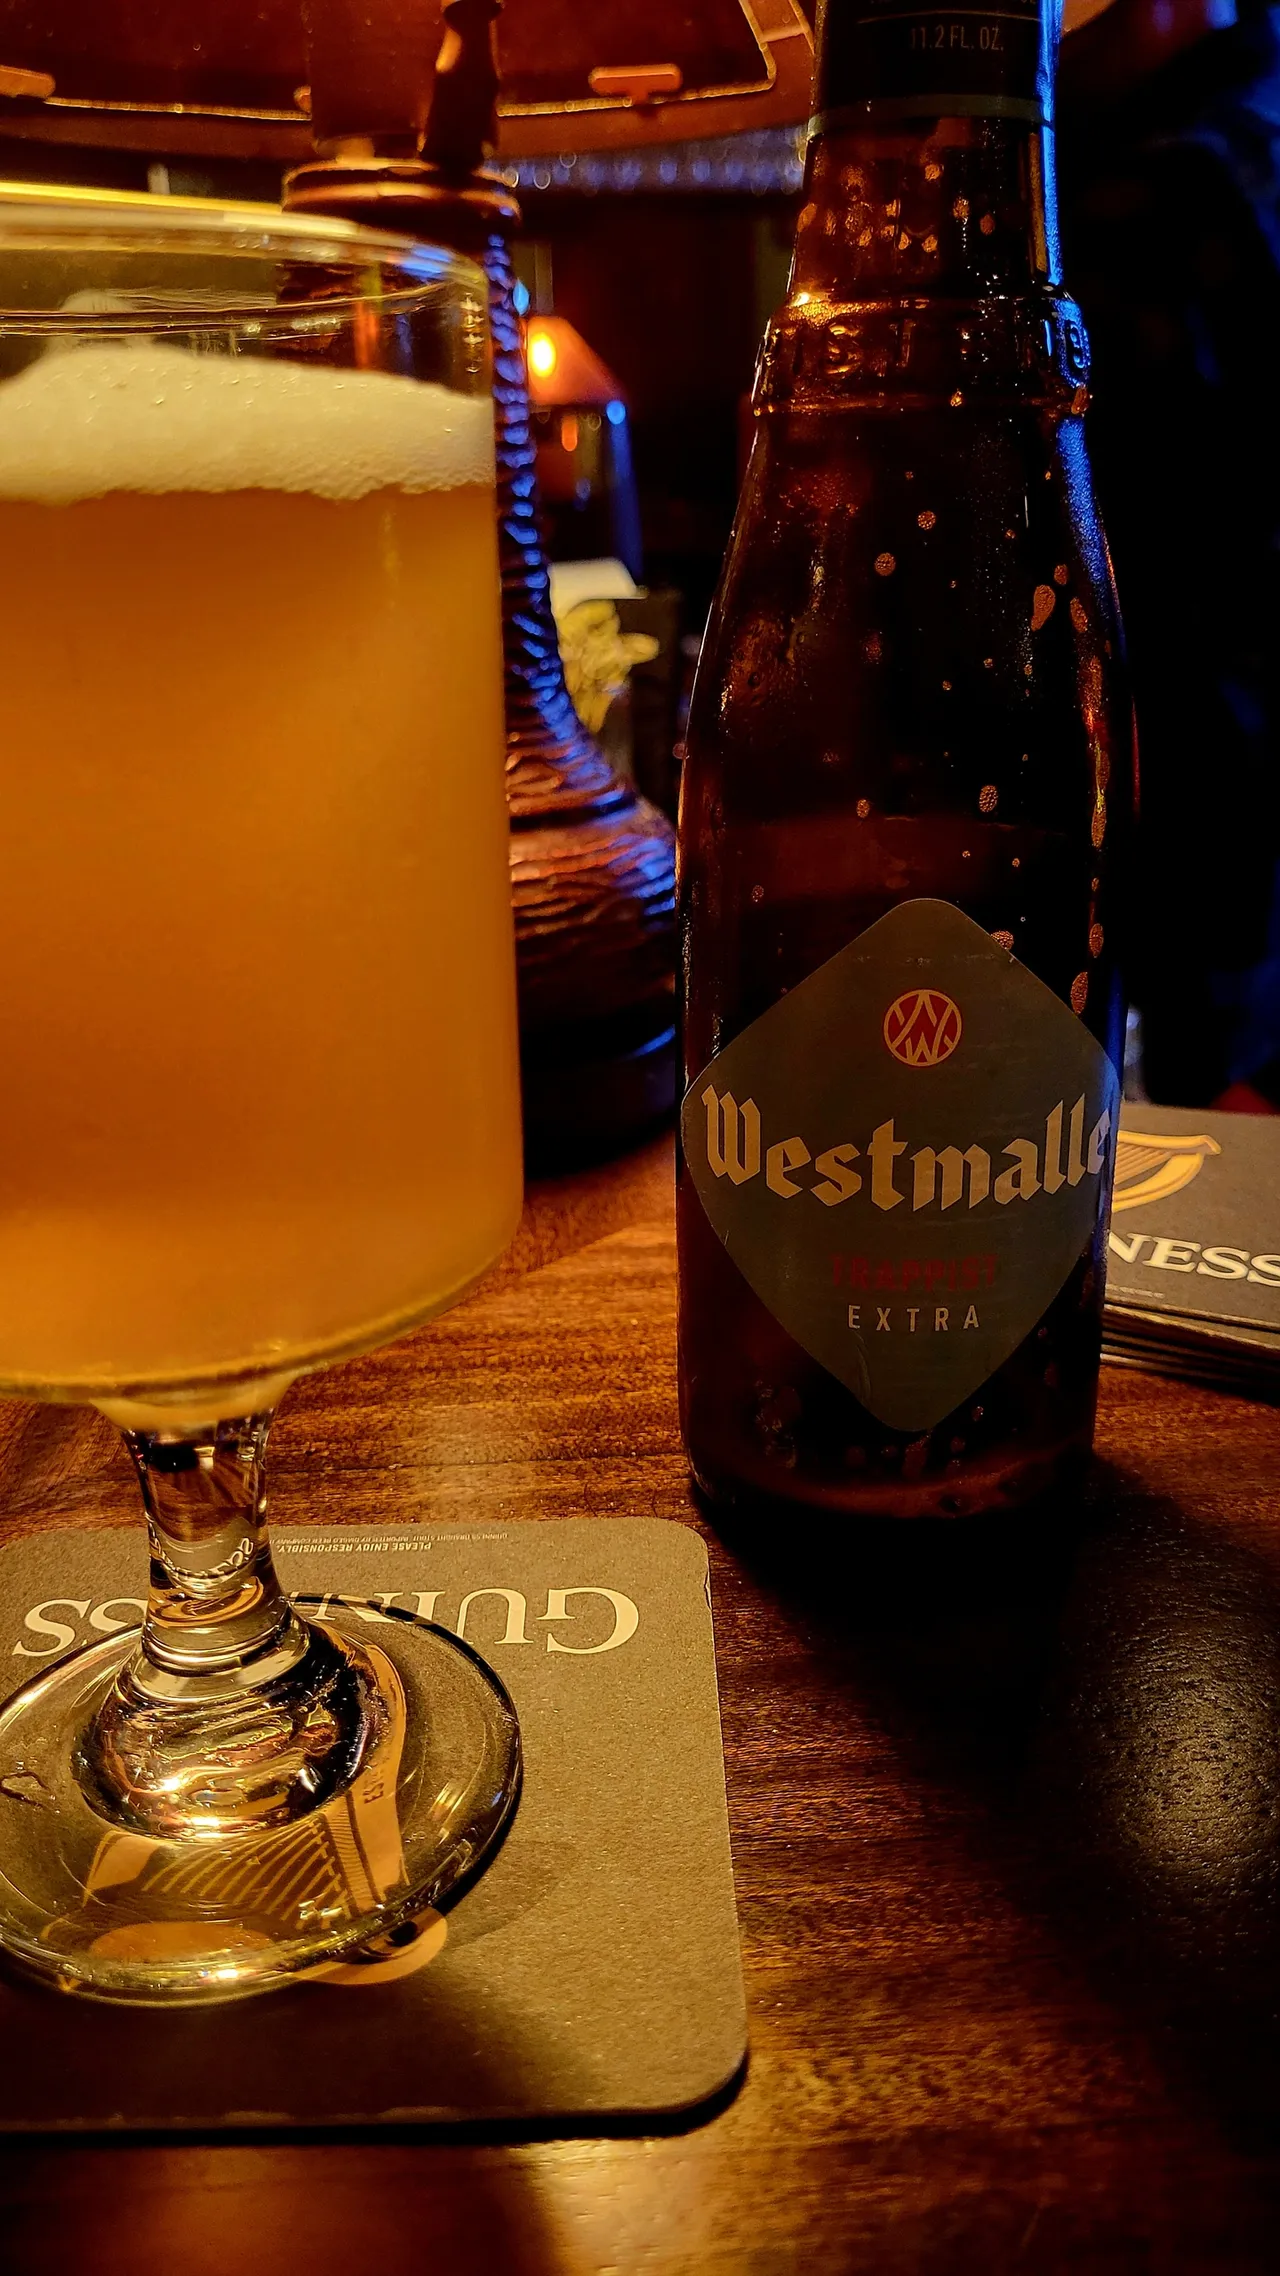 Empty Westmalle beer bottle next to a full stemmed glass